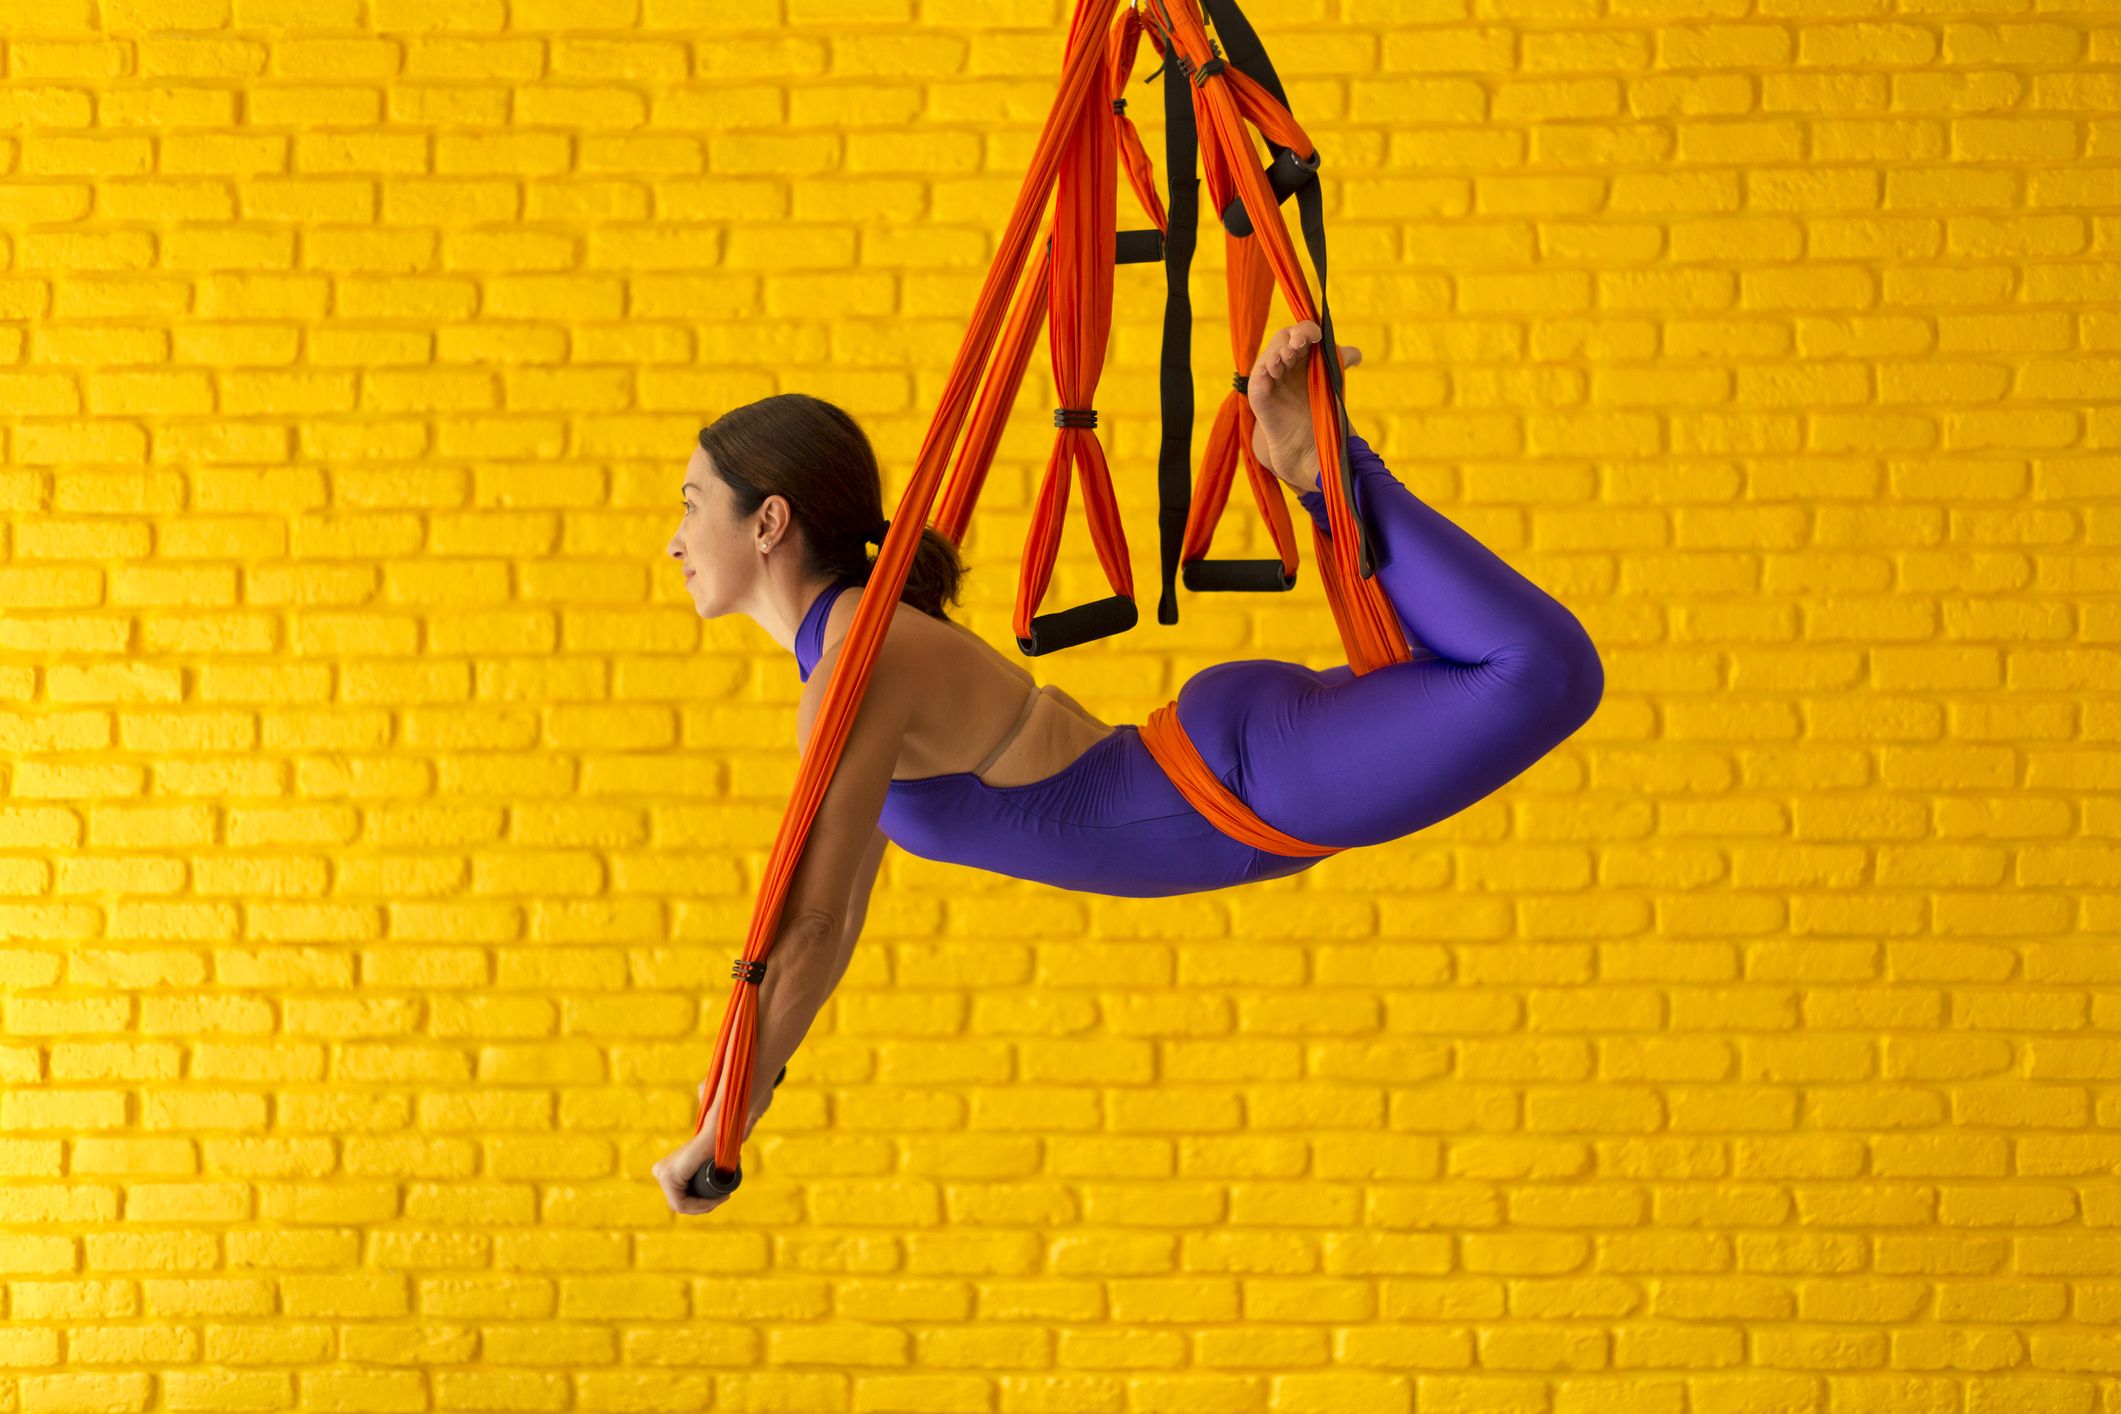 Lifting off at an aerial yoga class